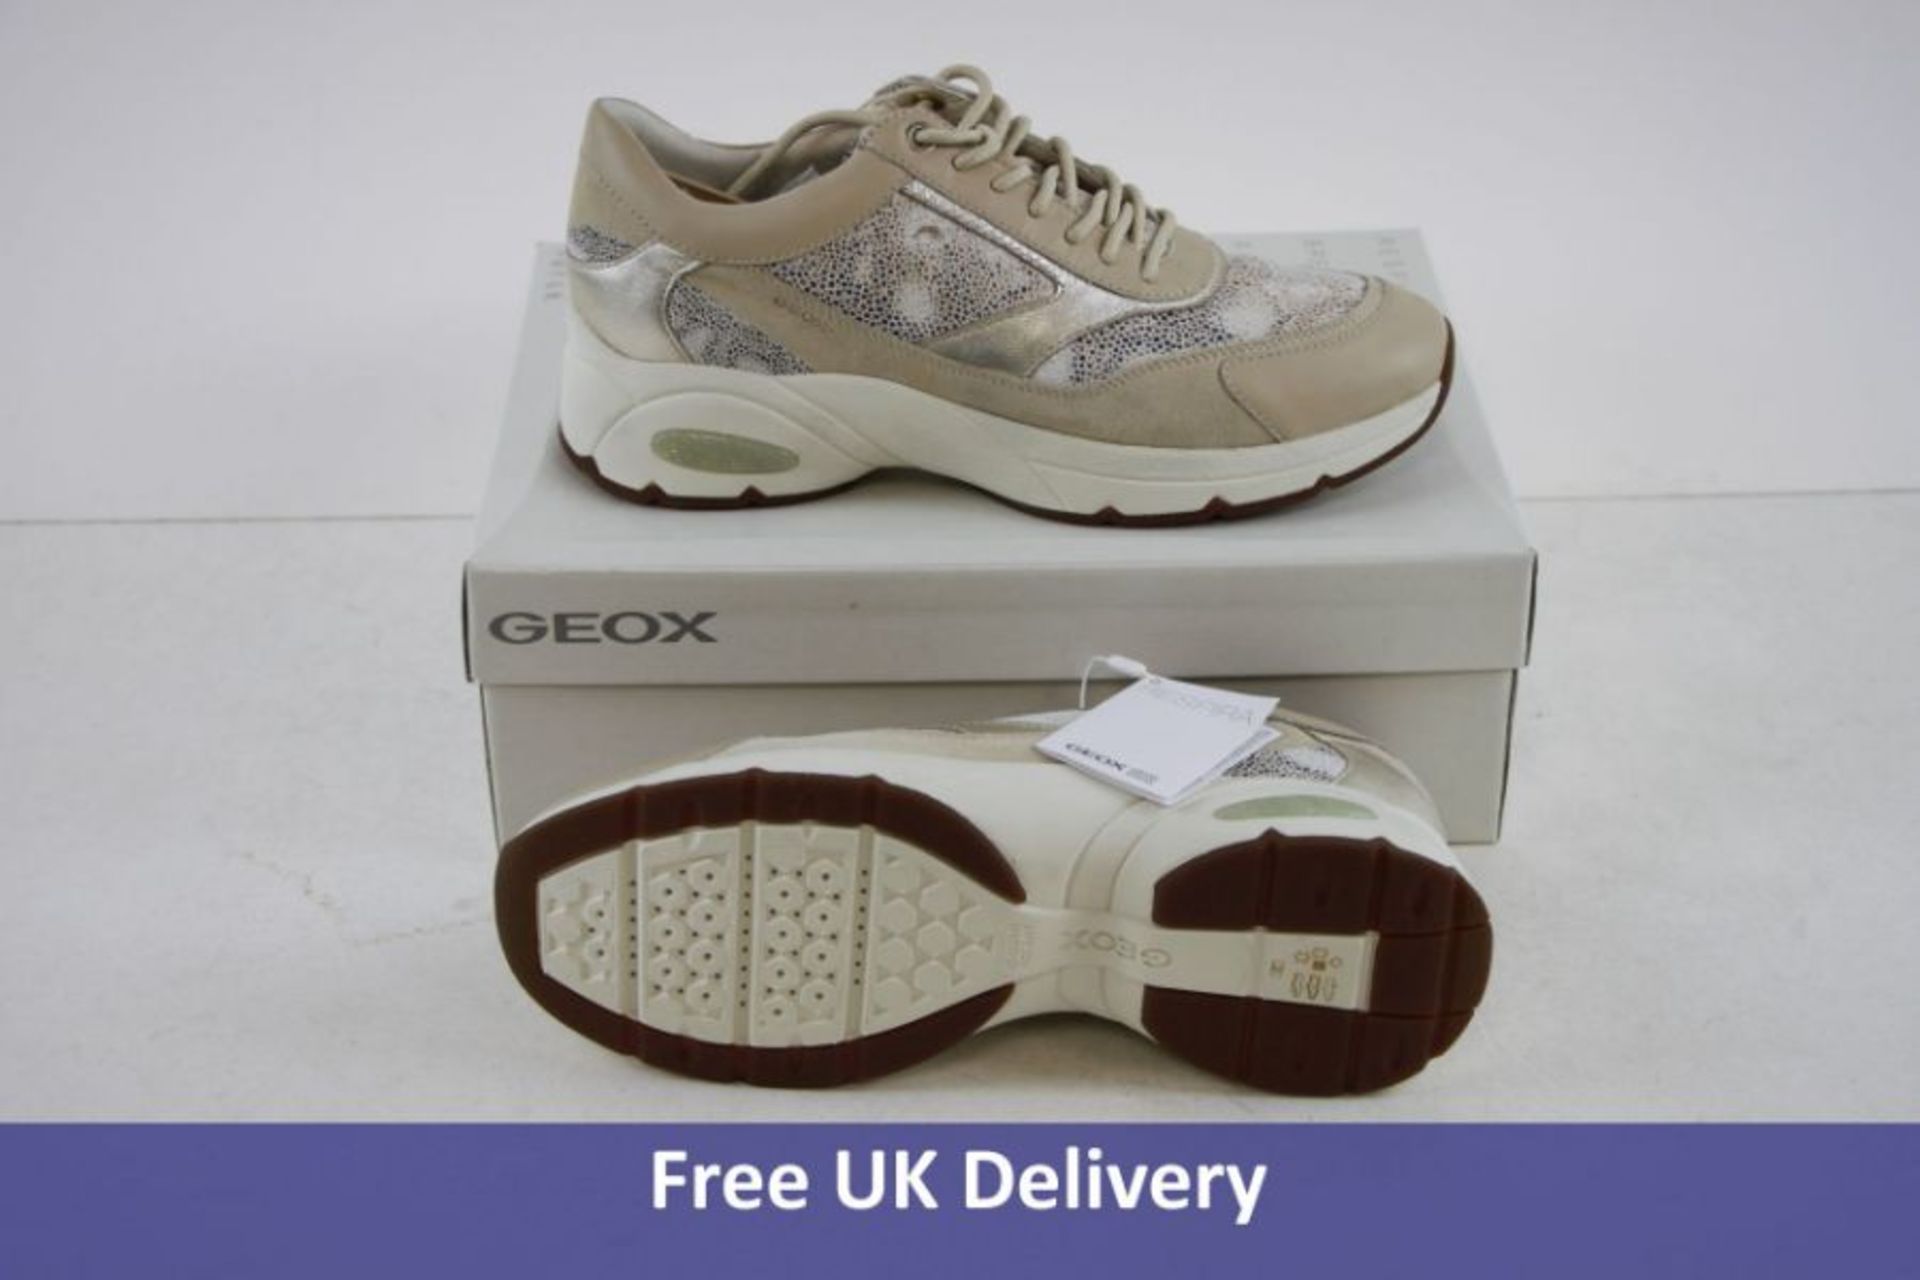 Geox Women's D Alhour A Trainers, Sand and Antelope. UK 7